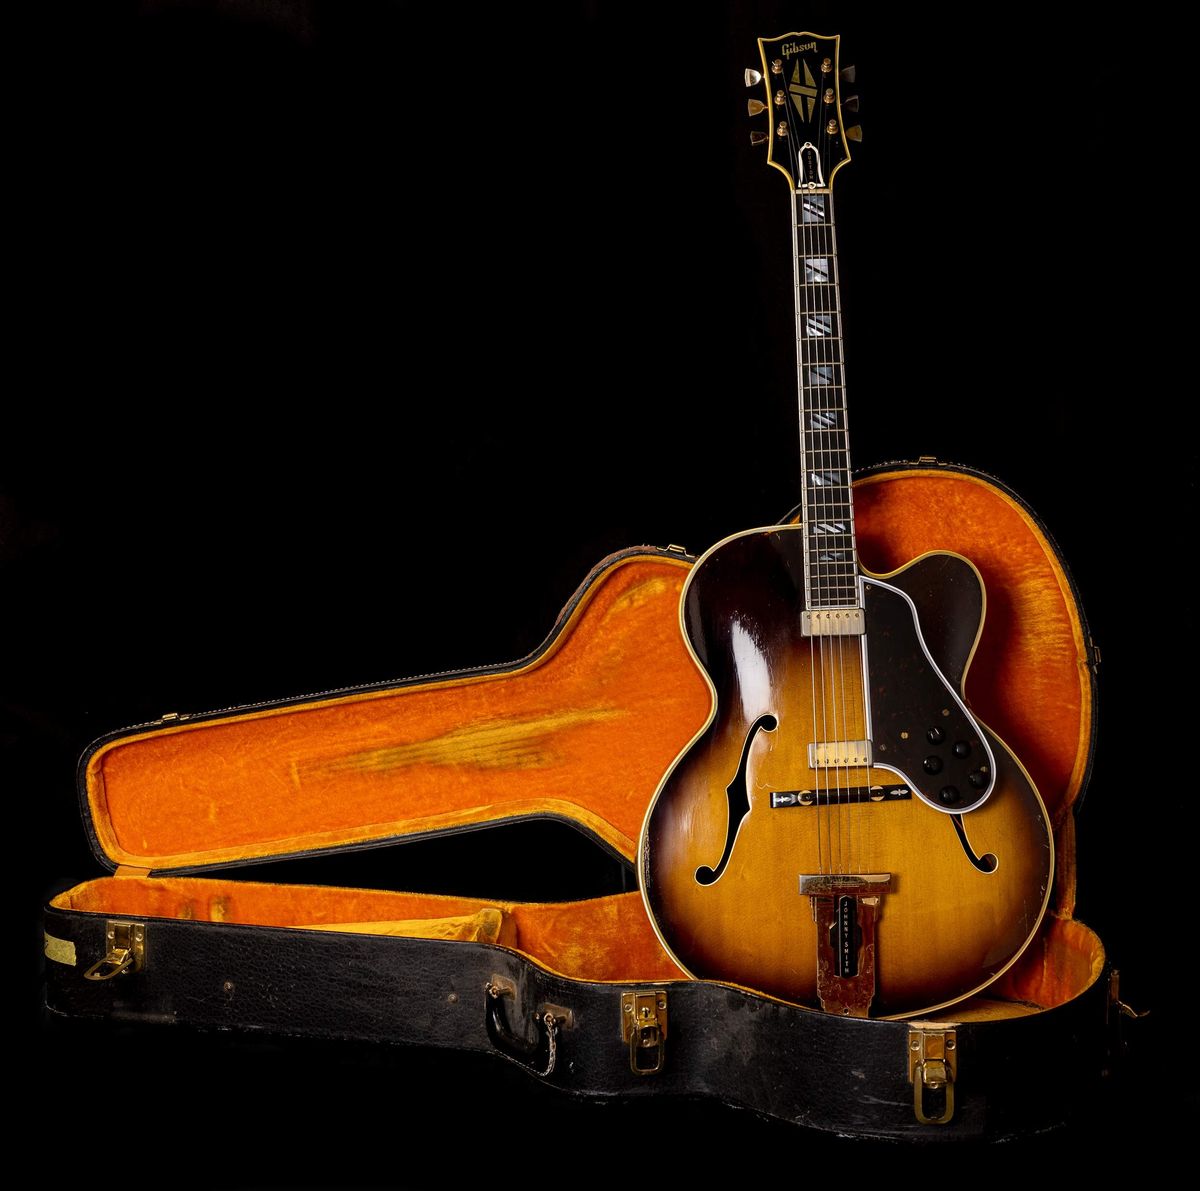 A Fine-Tuned Signature Guitar for a Jazz Great